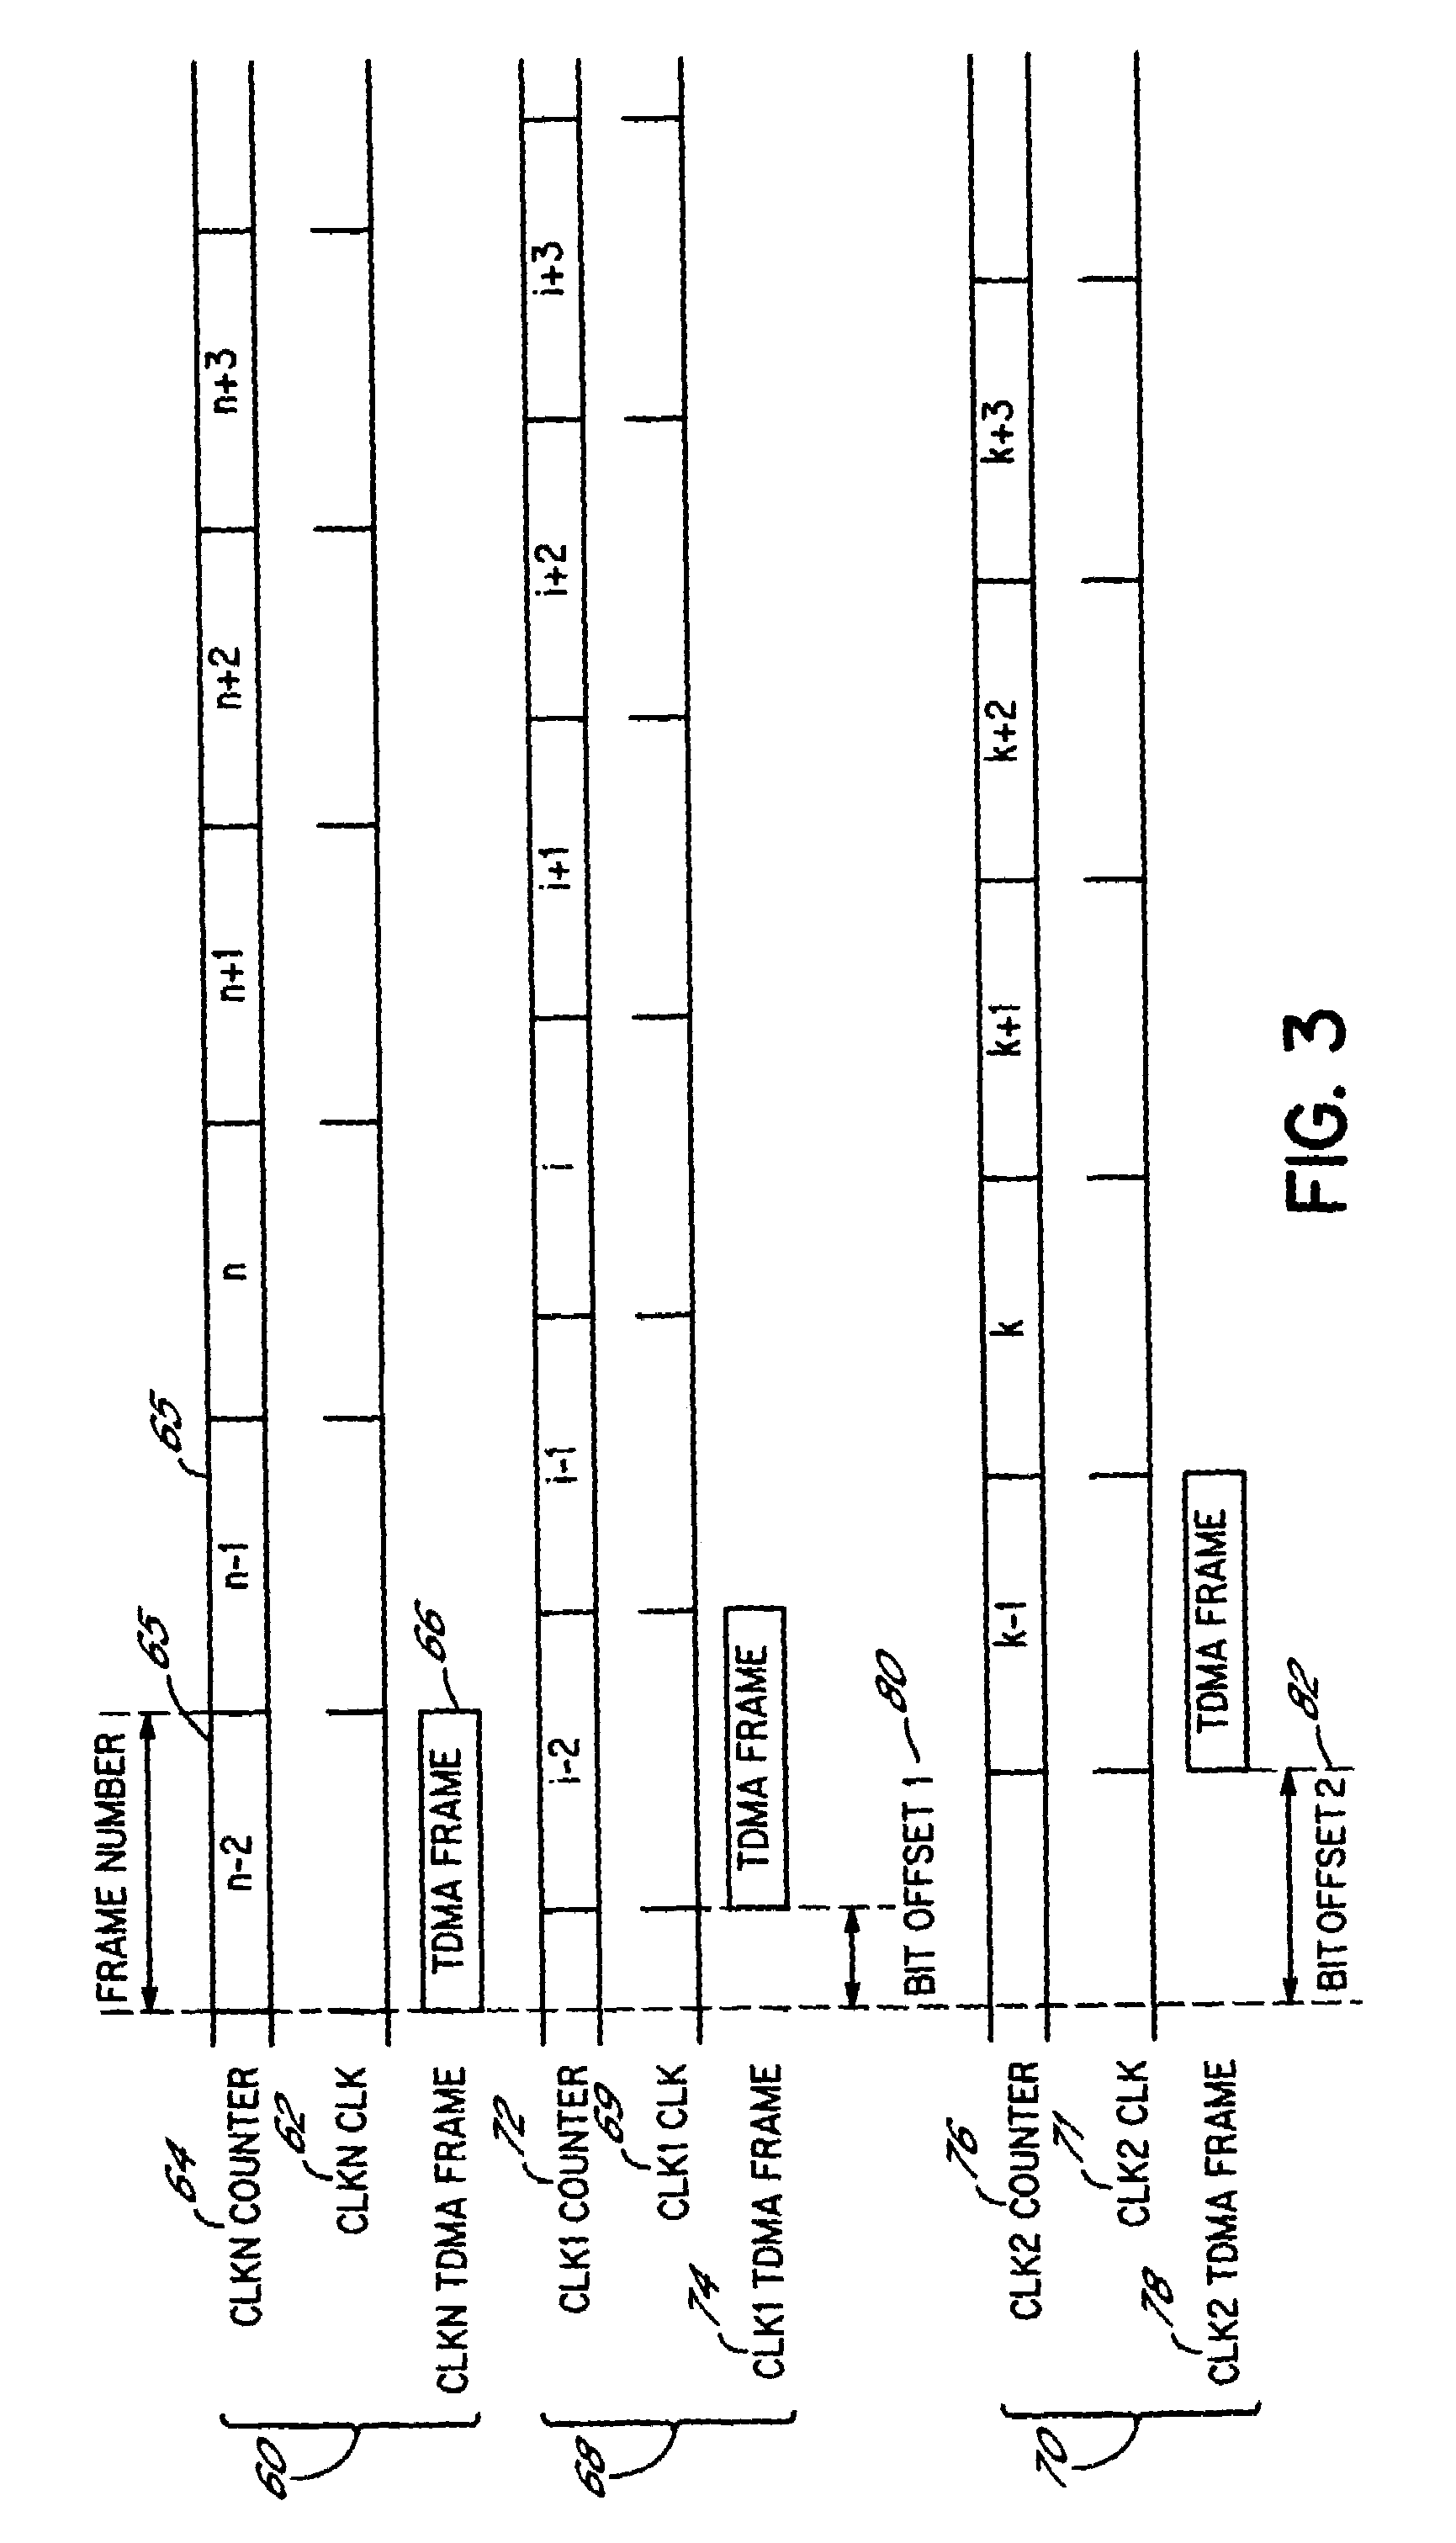 System and method for communicating between a plurality of asynchronous systems